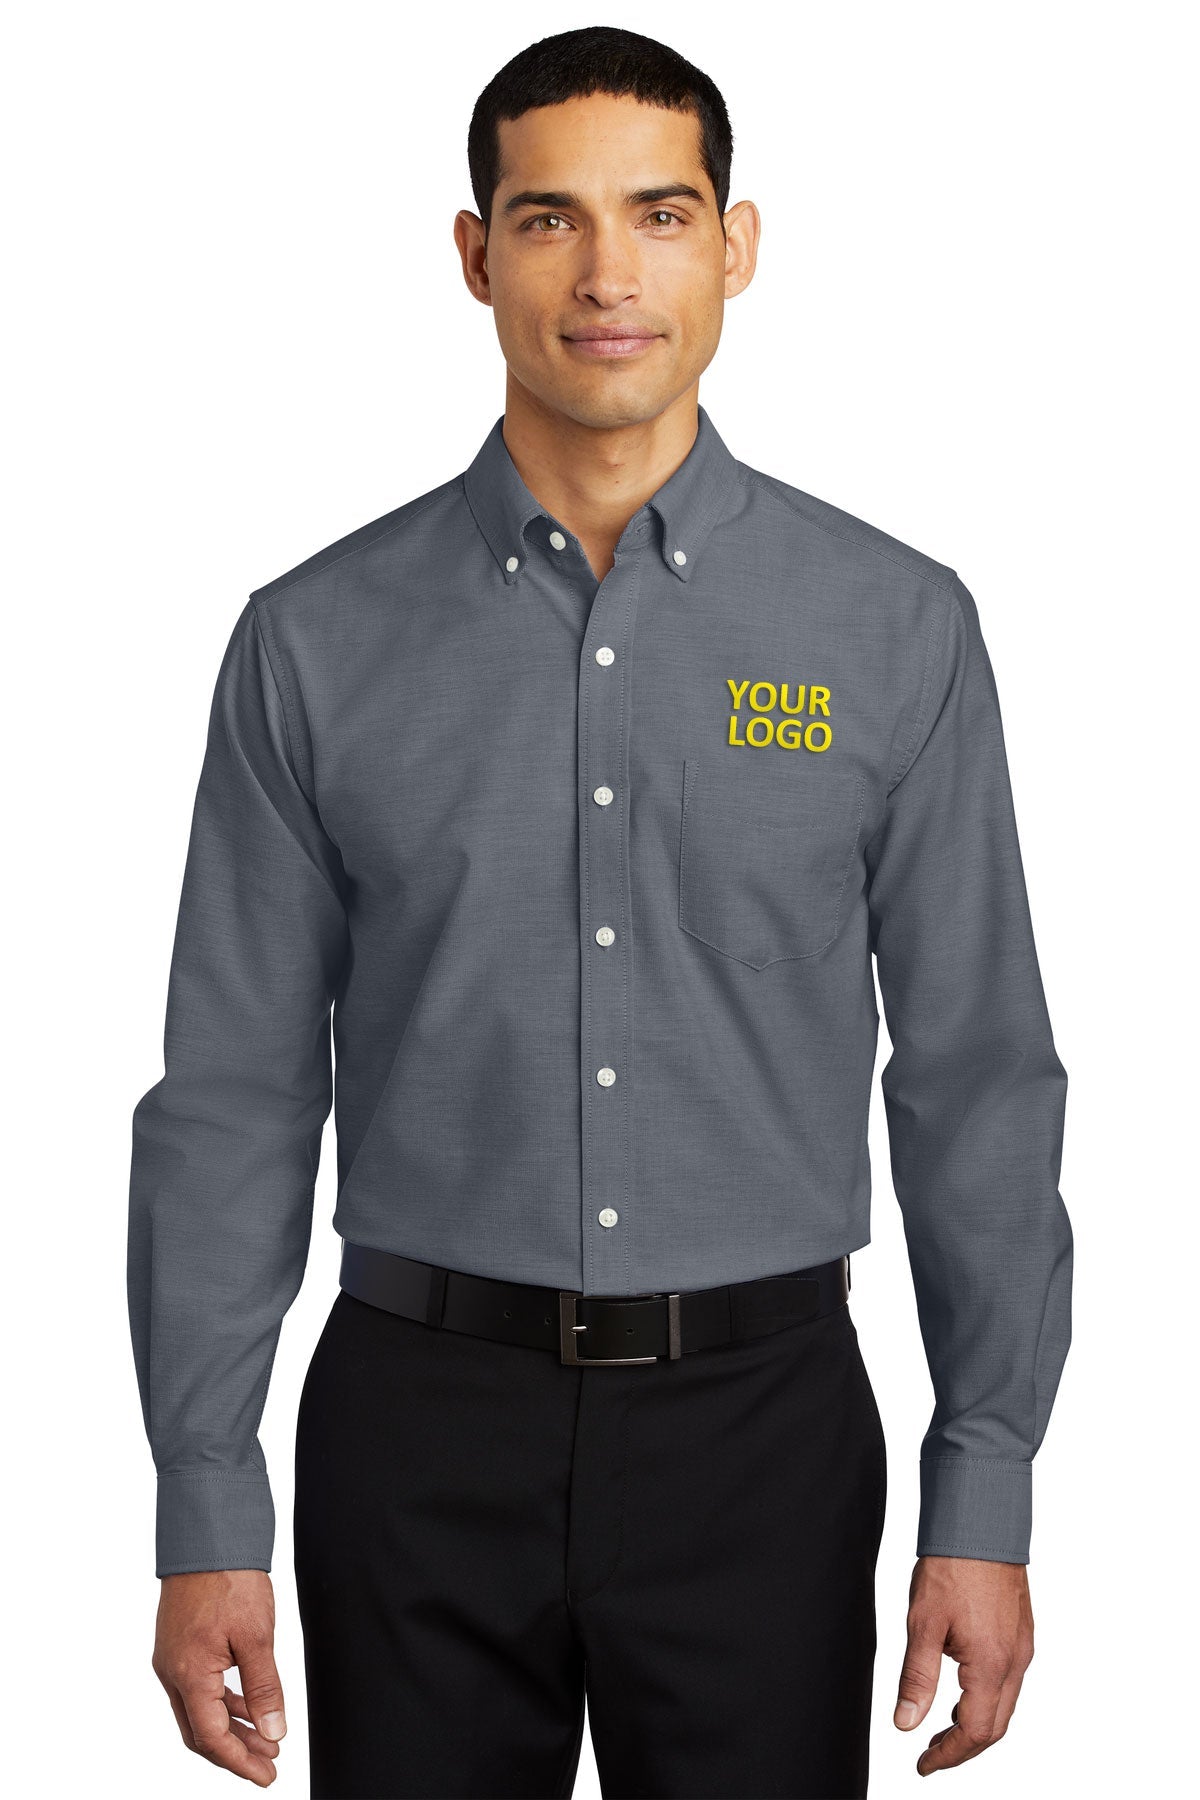 Port Authority Black S658 custom embroidered shirts